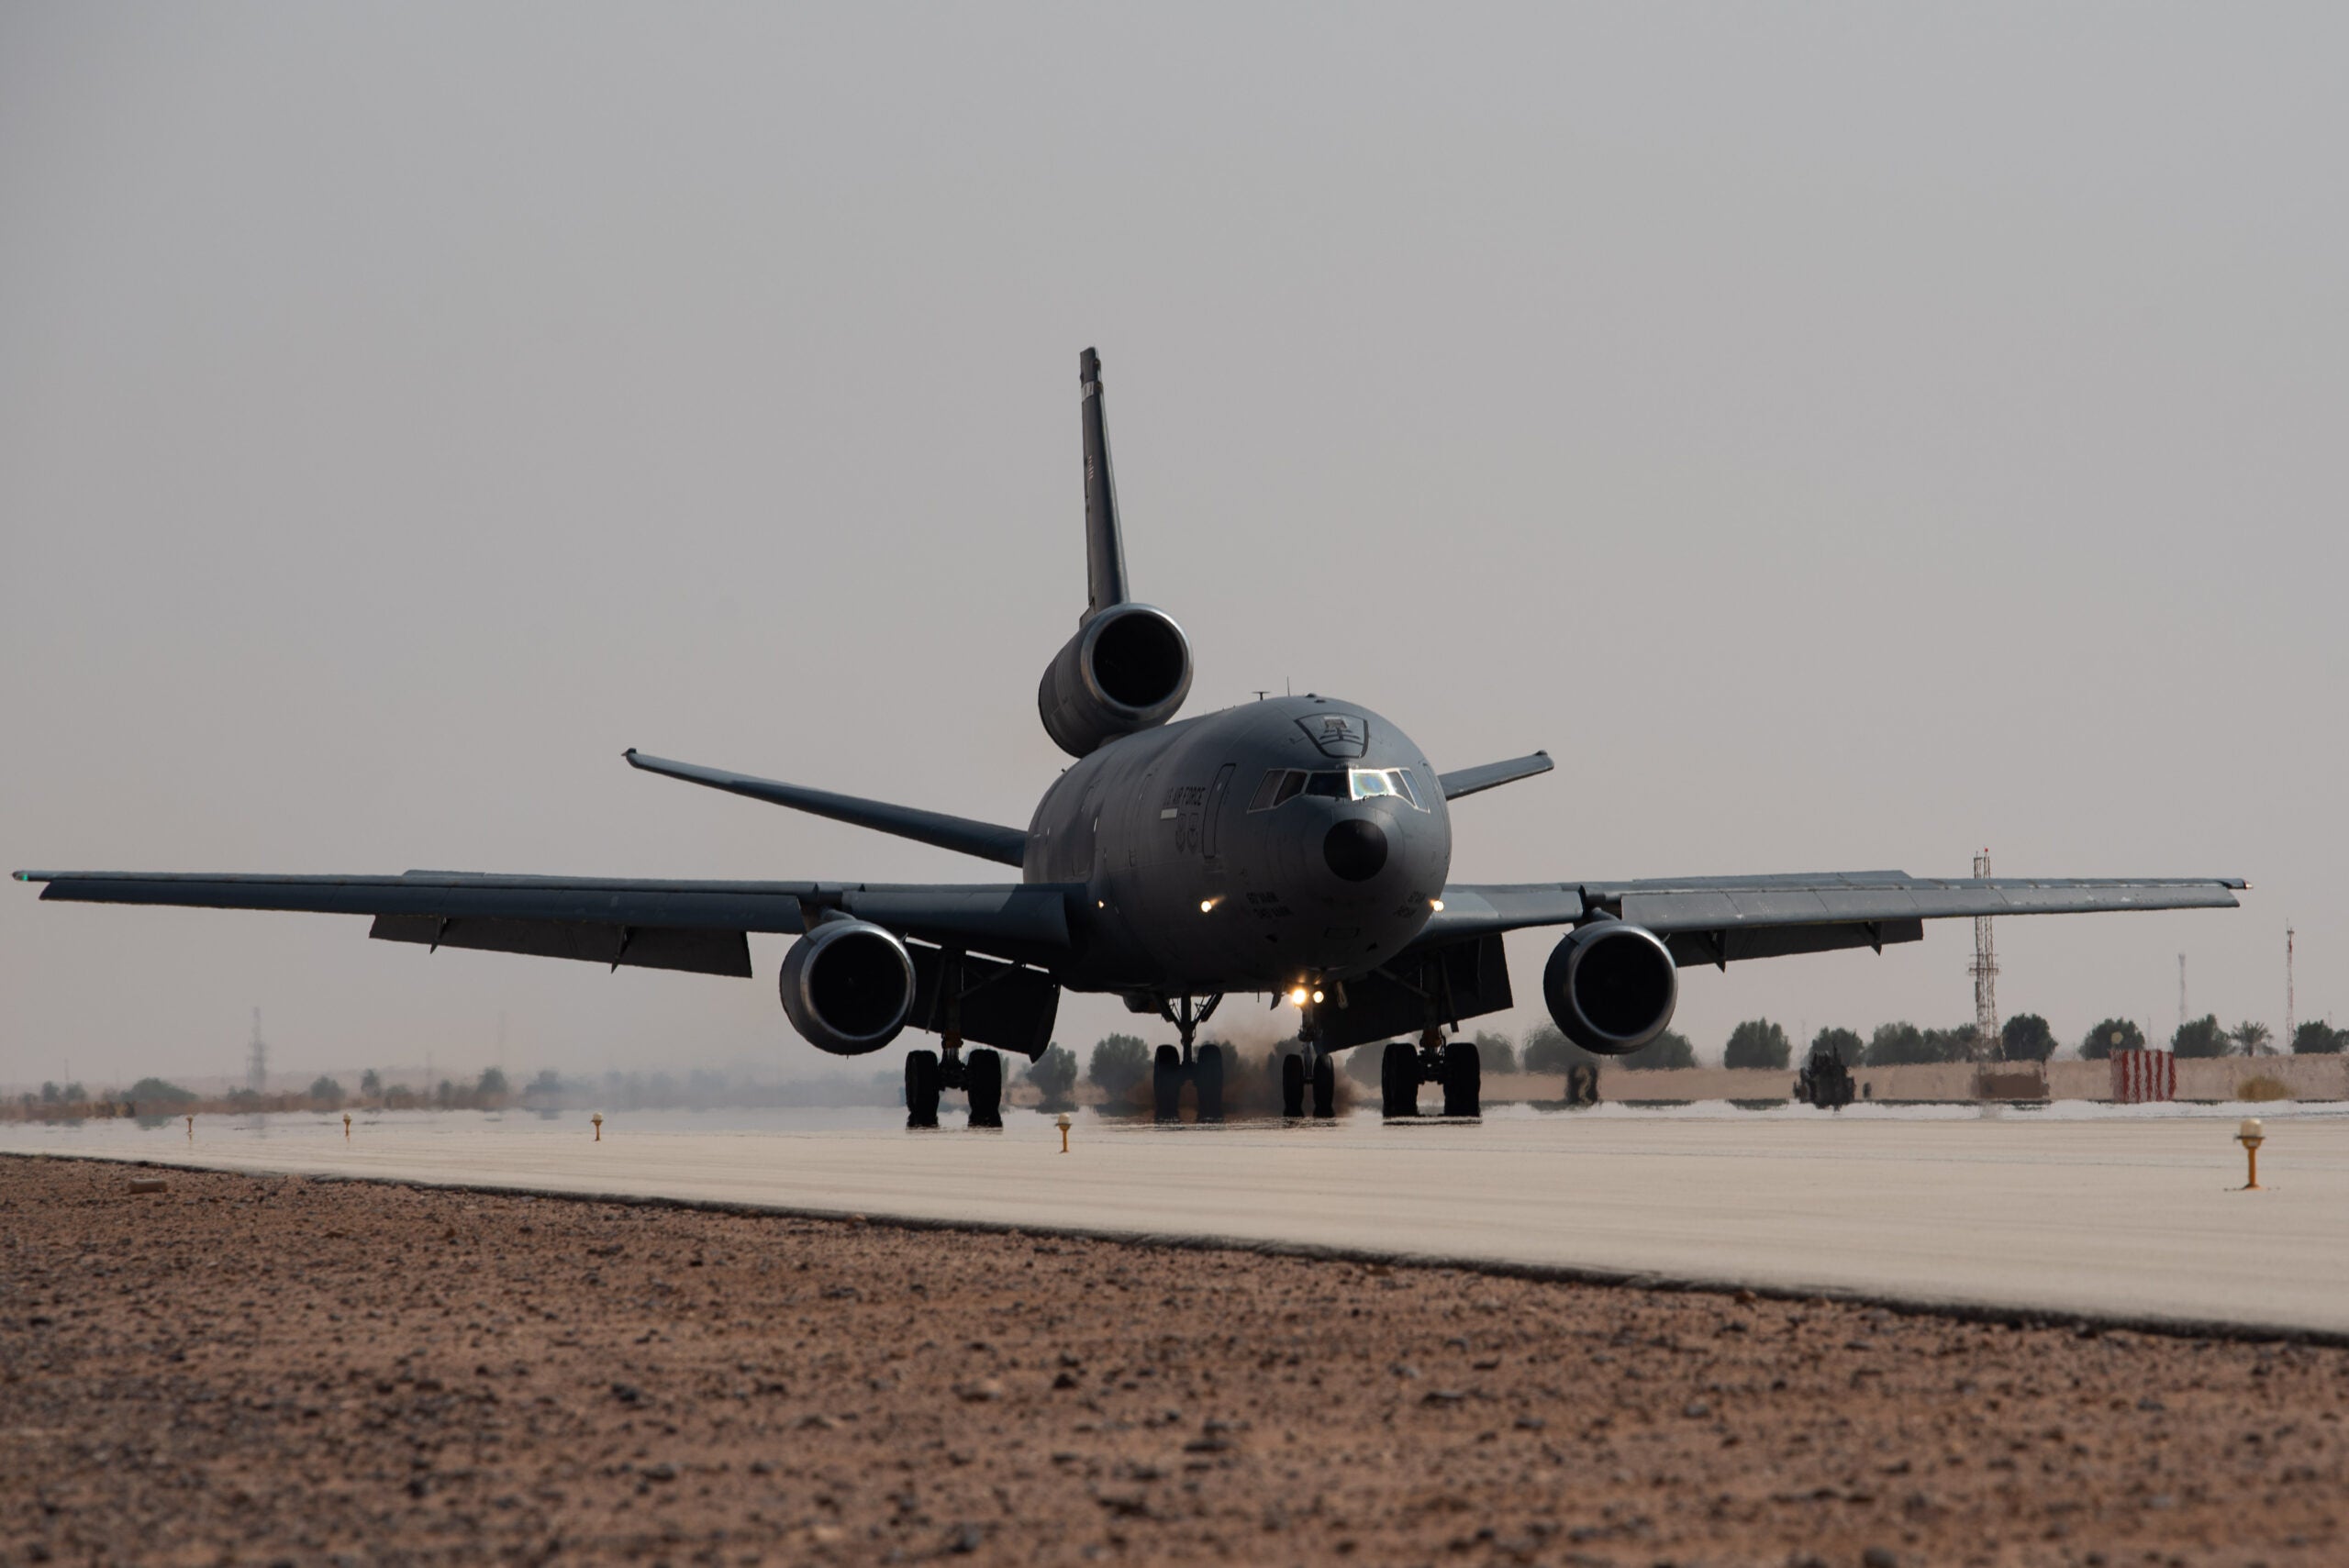 A KC-10 Extender assigned to the 908th Air Refueling Squadron lands after conducting the airframe's final combat sortie before inactivation at Prince Sultan Air Base, Kingdom of Saudi Arabia, Oct. 3, 2023. The flight served as a capstone for the KC-10 after over 30 years of service within the U.S. Air Forces Central (AFCENT) Area of Responsibility. By September 2024, the U.S. Air Force's fleet of KC-10s will be decommissioned and gradually replaced by the KC-46 aircraft. (U.S. Air Force photo by Tech. Sgt. Alexander Frank)